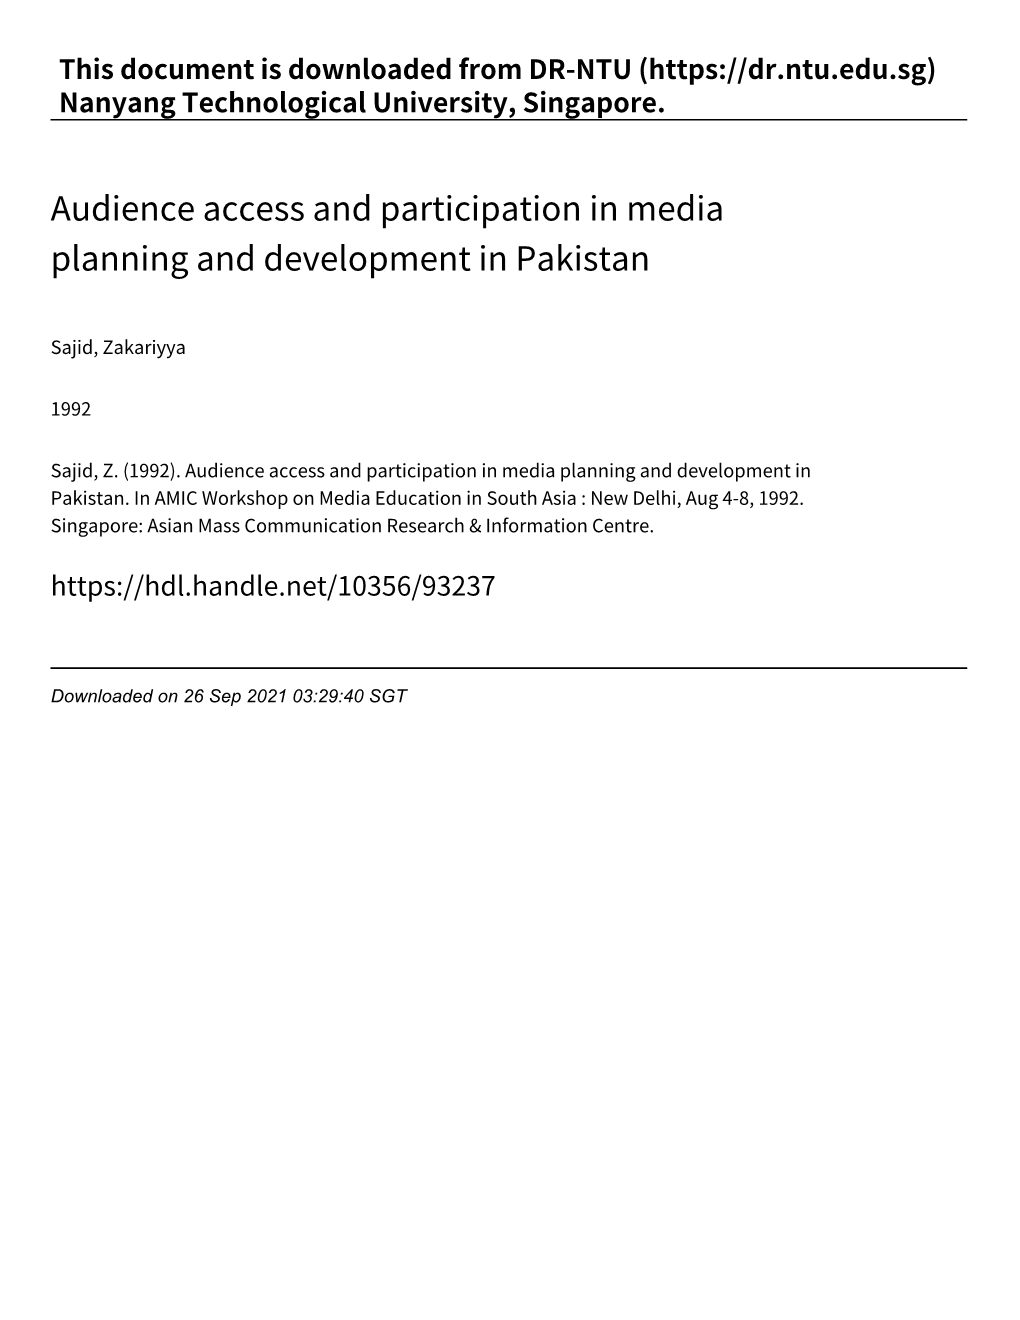 Audience Access and Participation in Media Planning and Development in Pakistan